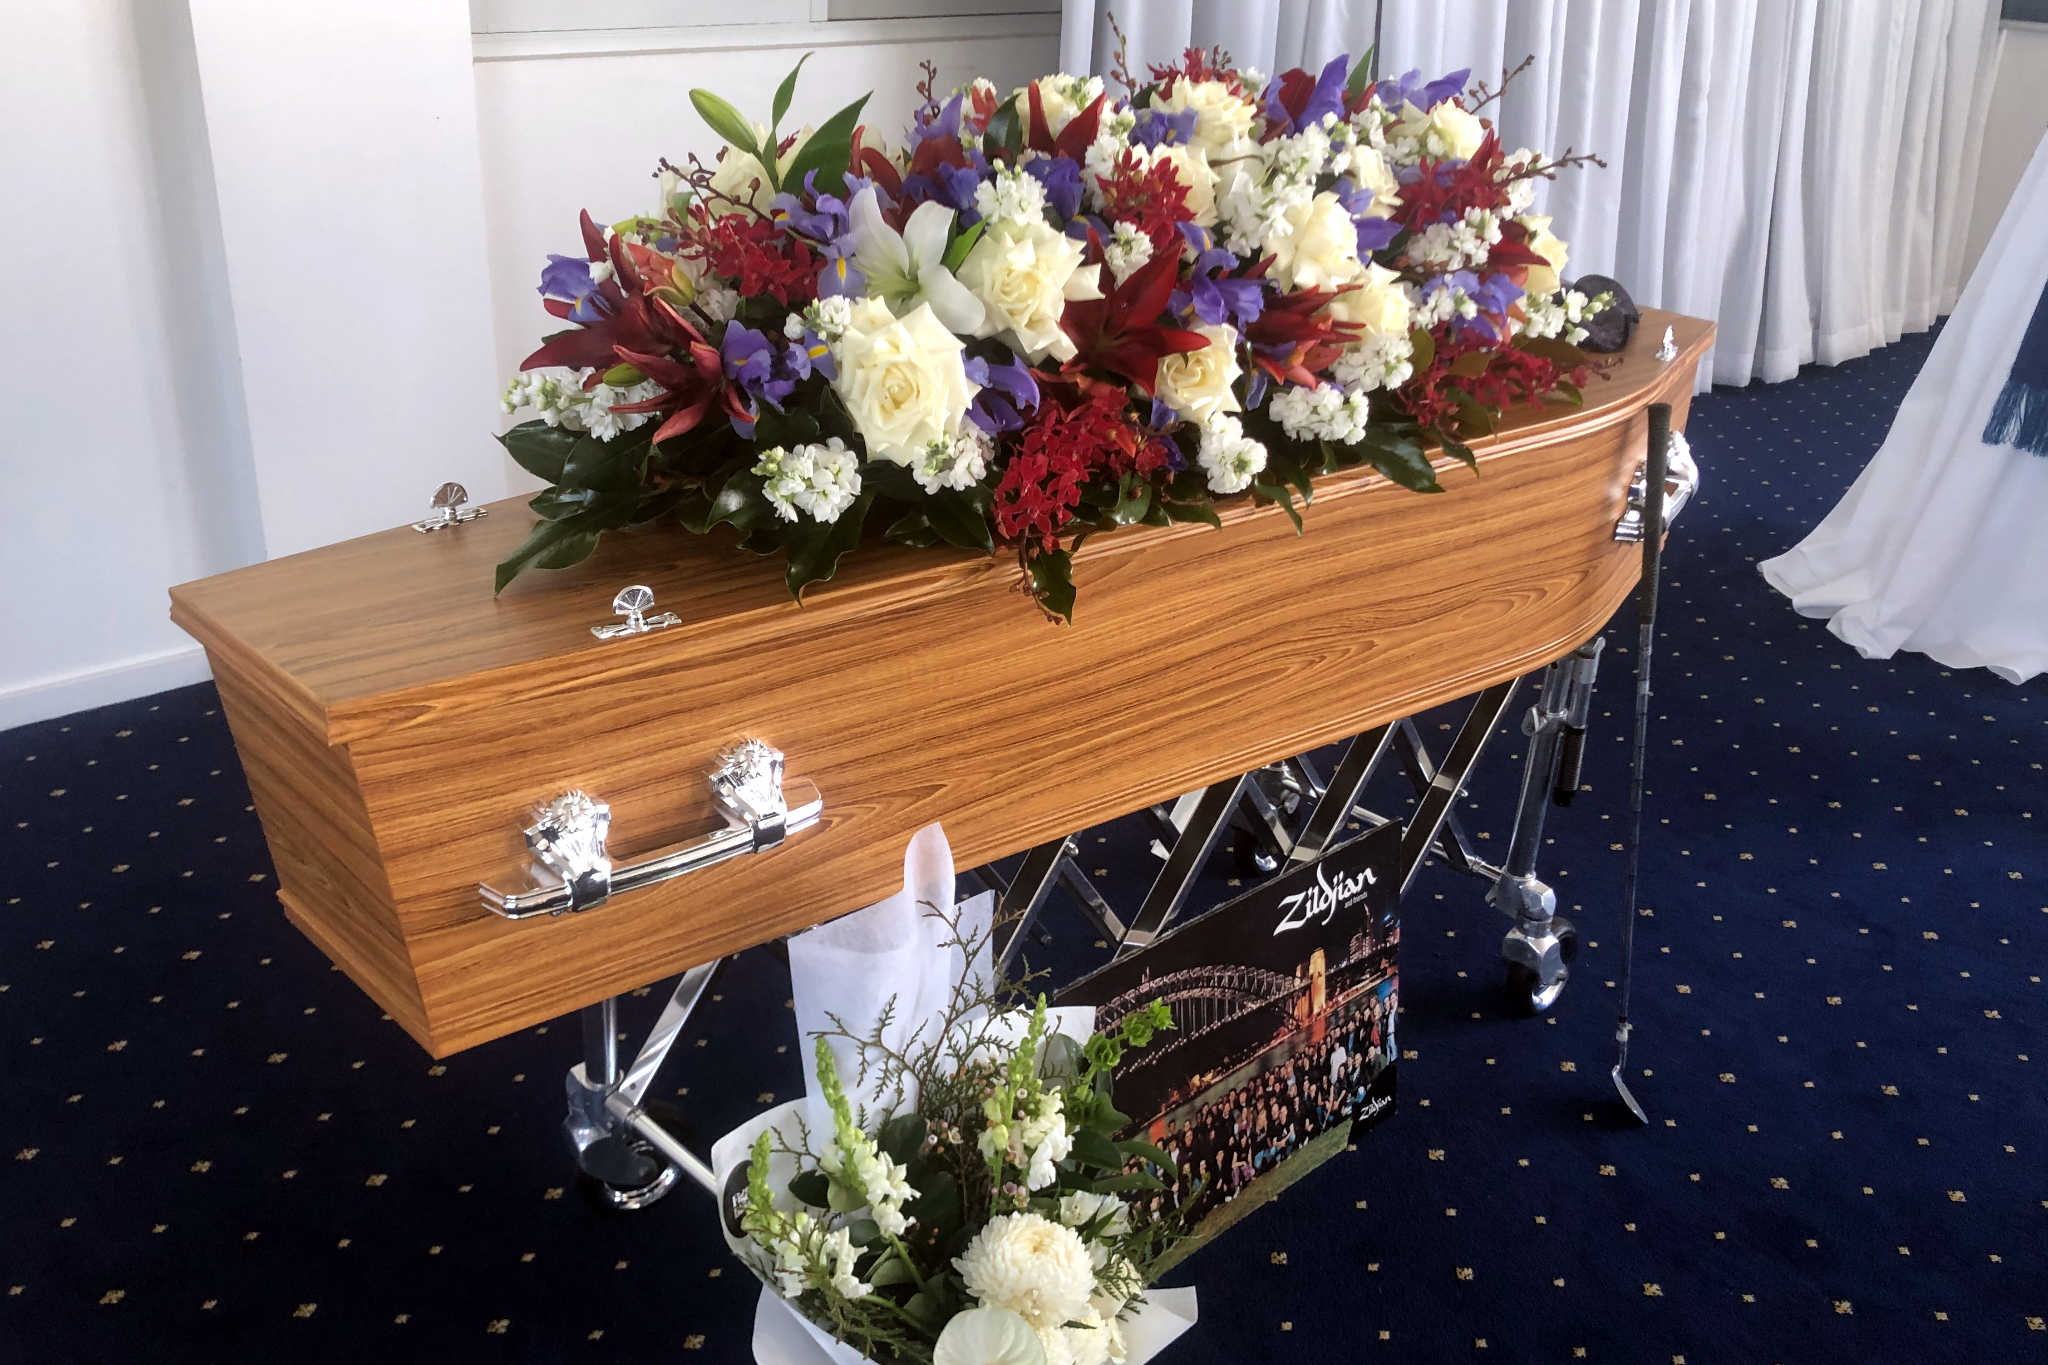 A wooden coffin with red, white and purple flowers on top